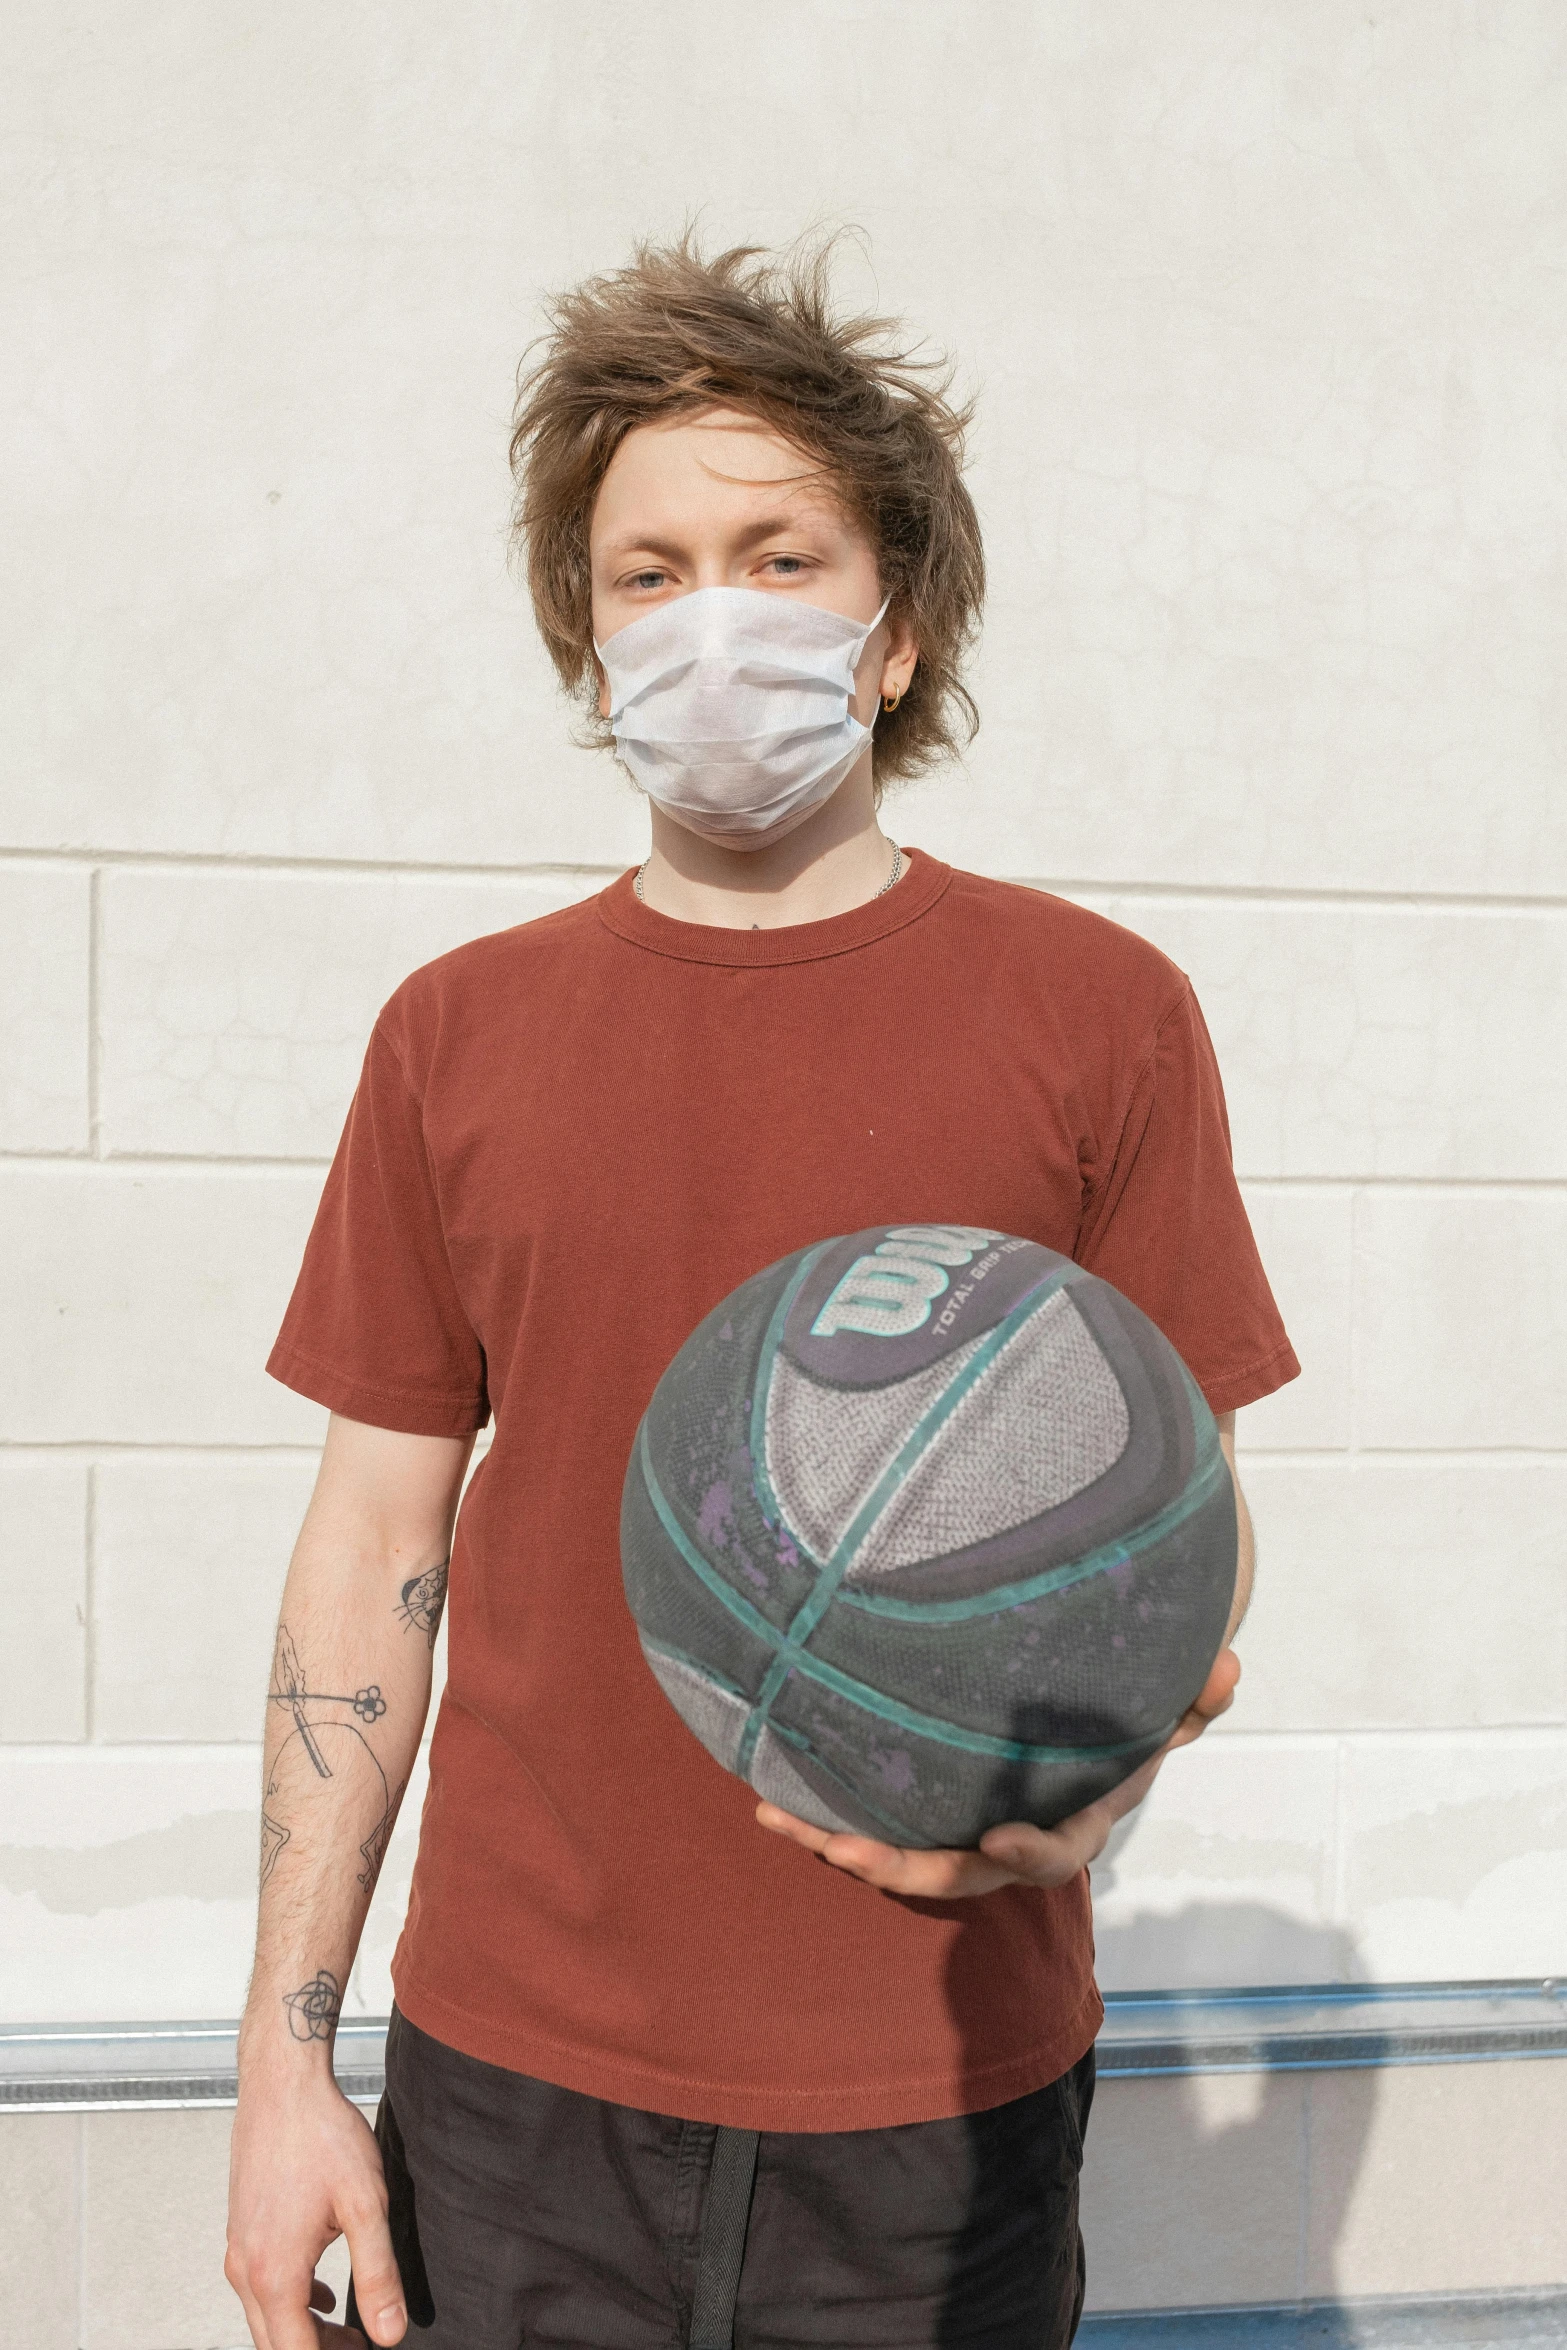 a young man wearing a face mask and holding a basketball